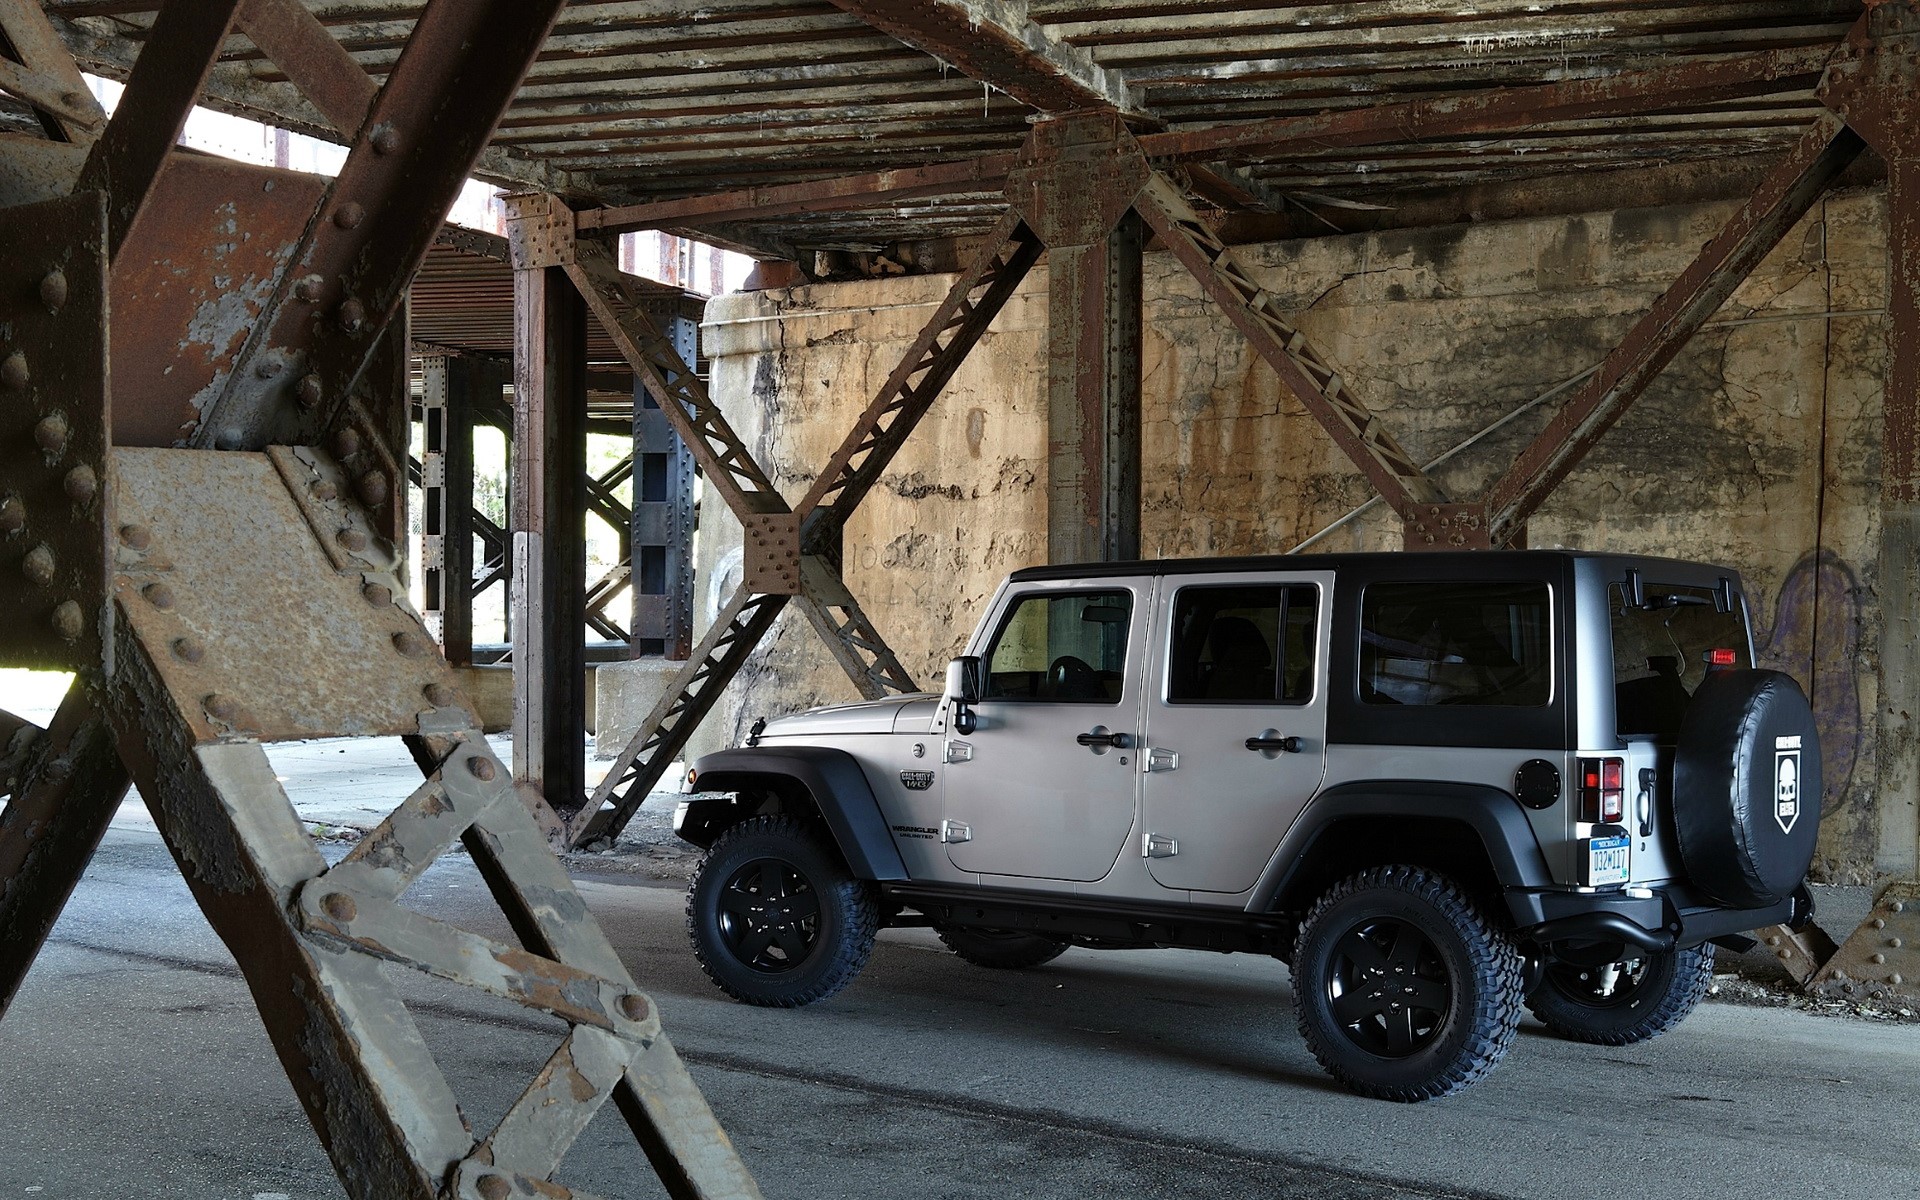 Jeep Quicksand Concept Wallpapers